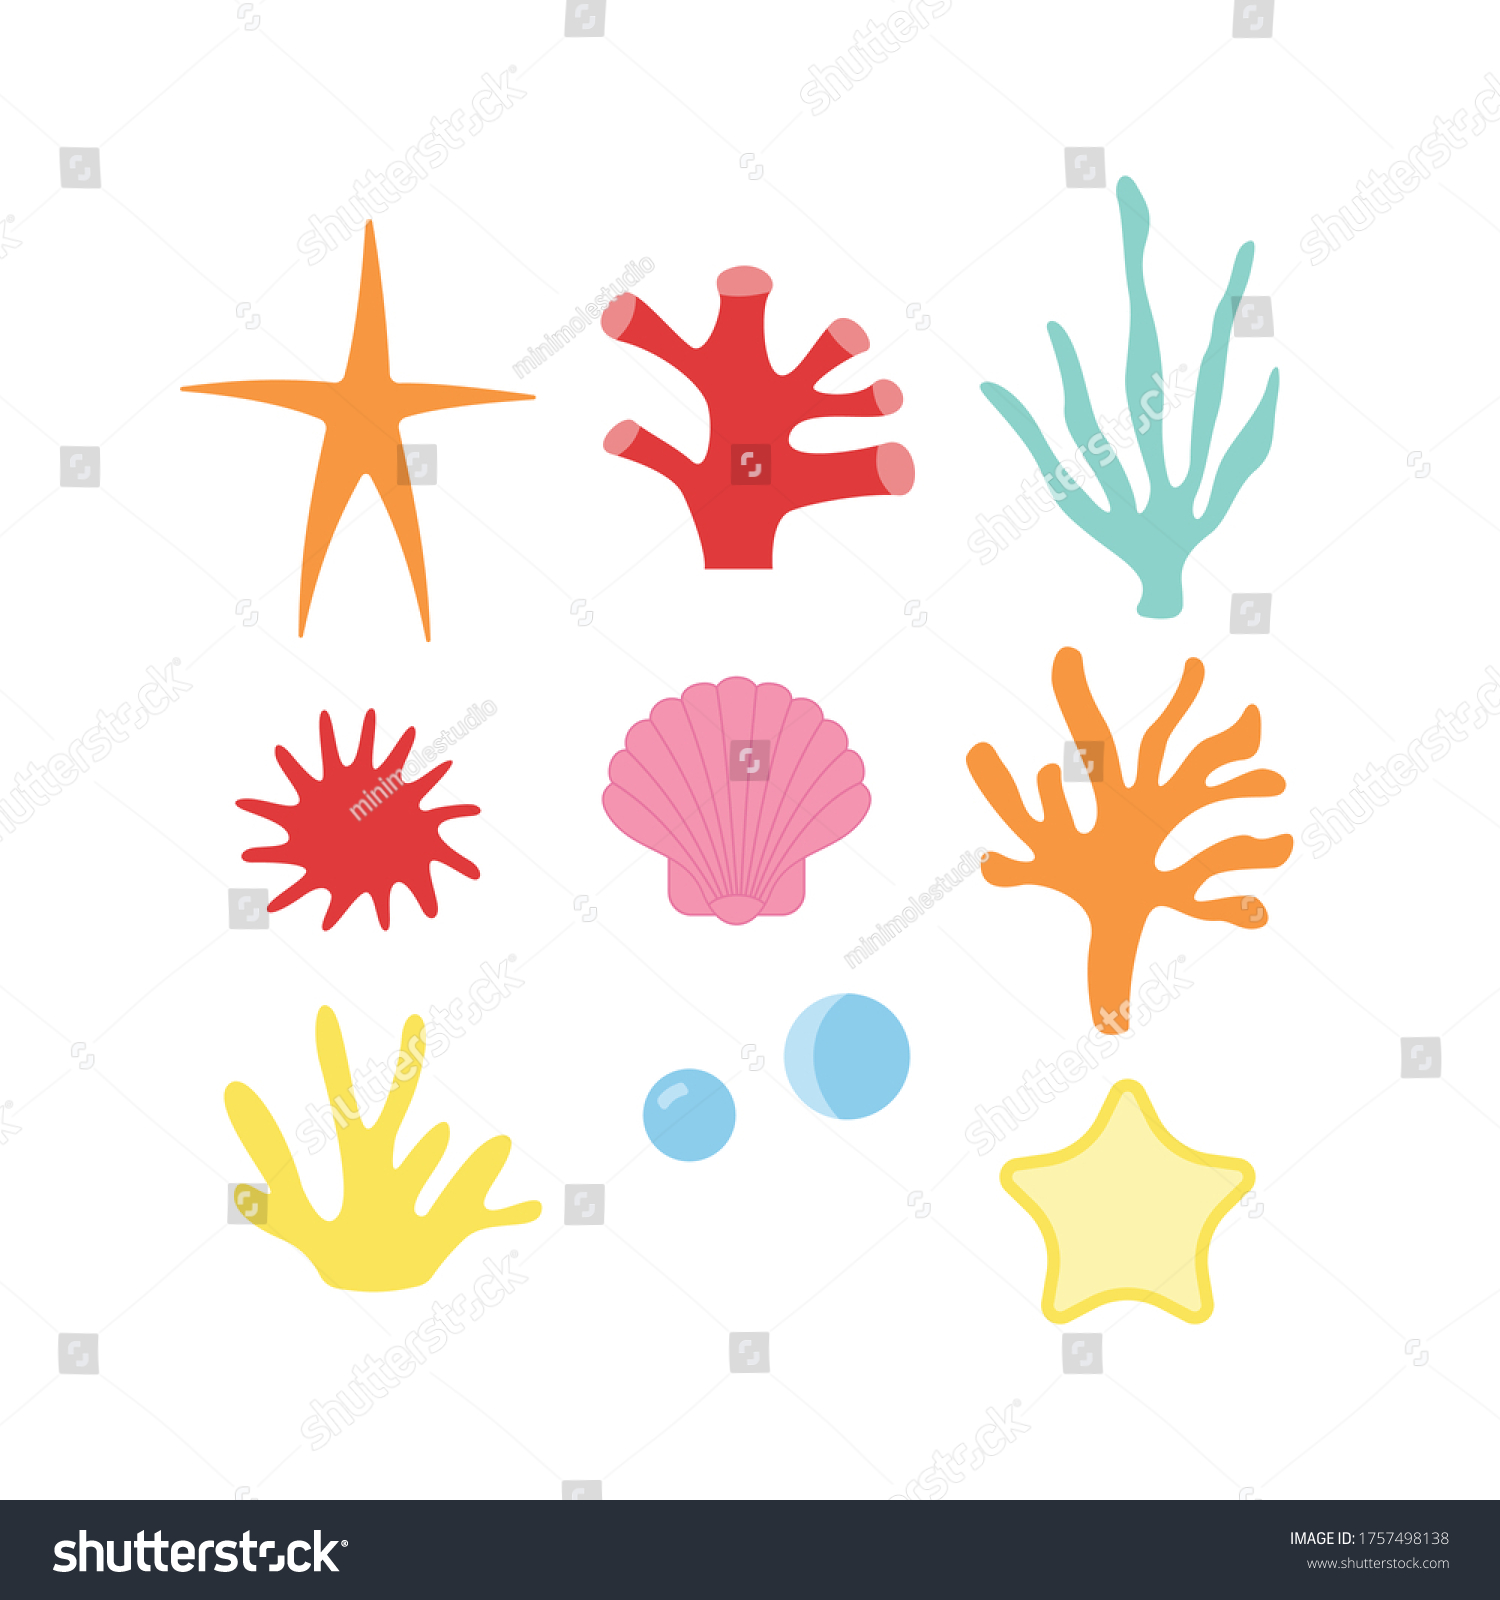 SVG of Vector illustration of a set of various corals and starfish Simple, flat kawaii style. svg